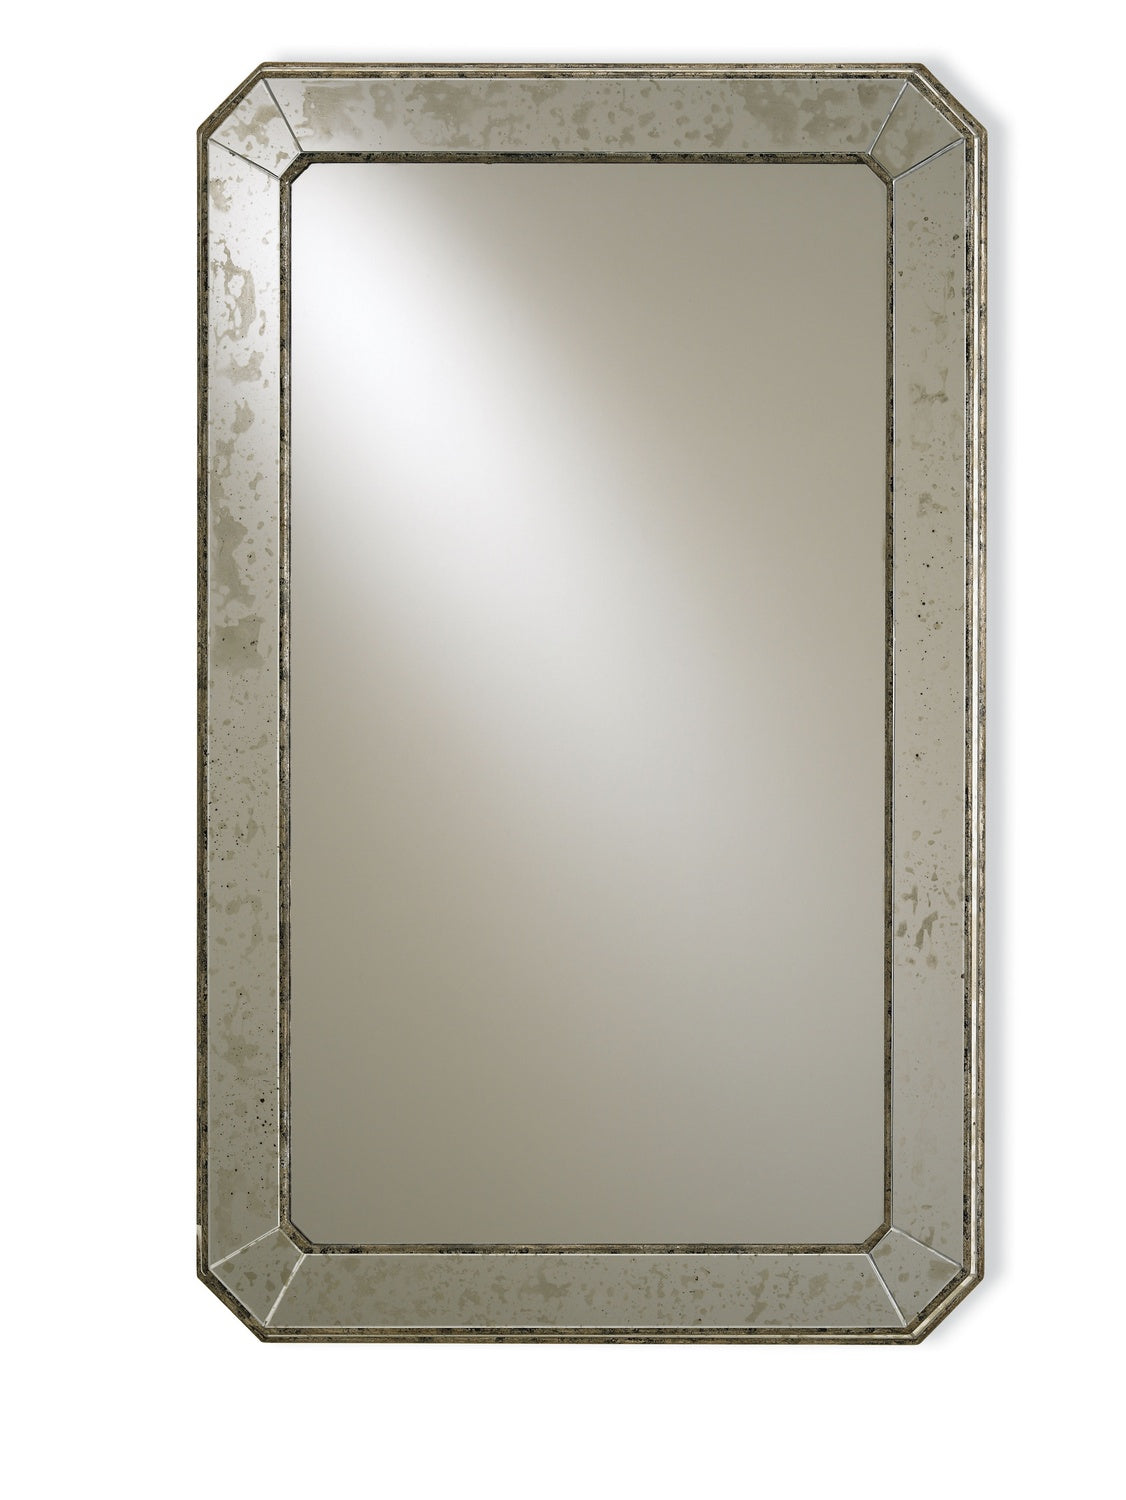 Mirror from the Antiqued collection in Antique Mirror finish